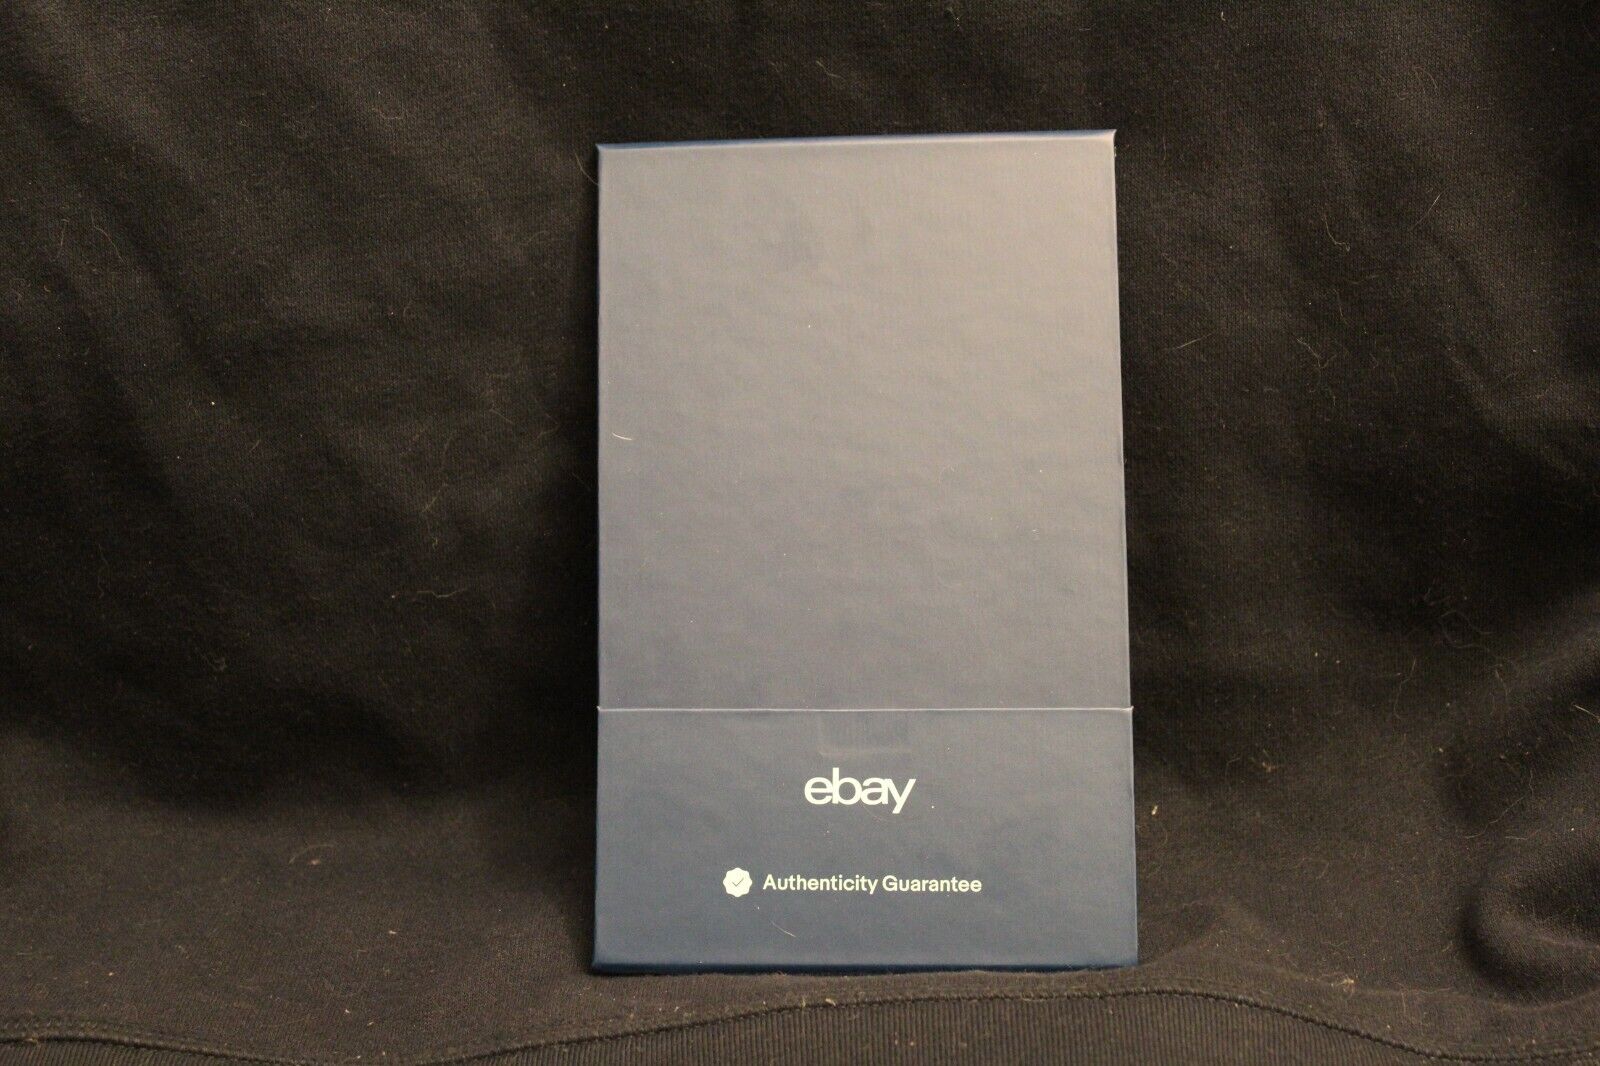 Ebay Authenticity Guarantee Card Carrier Case For Tcg Cards, Top Loader Included